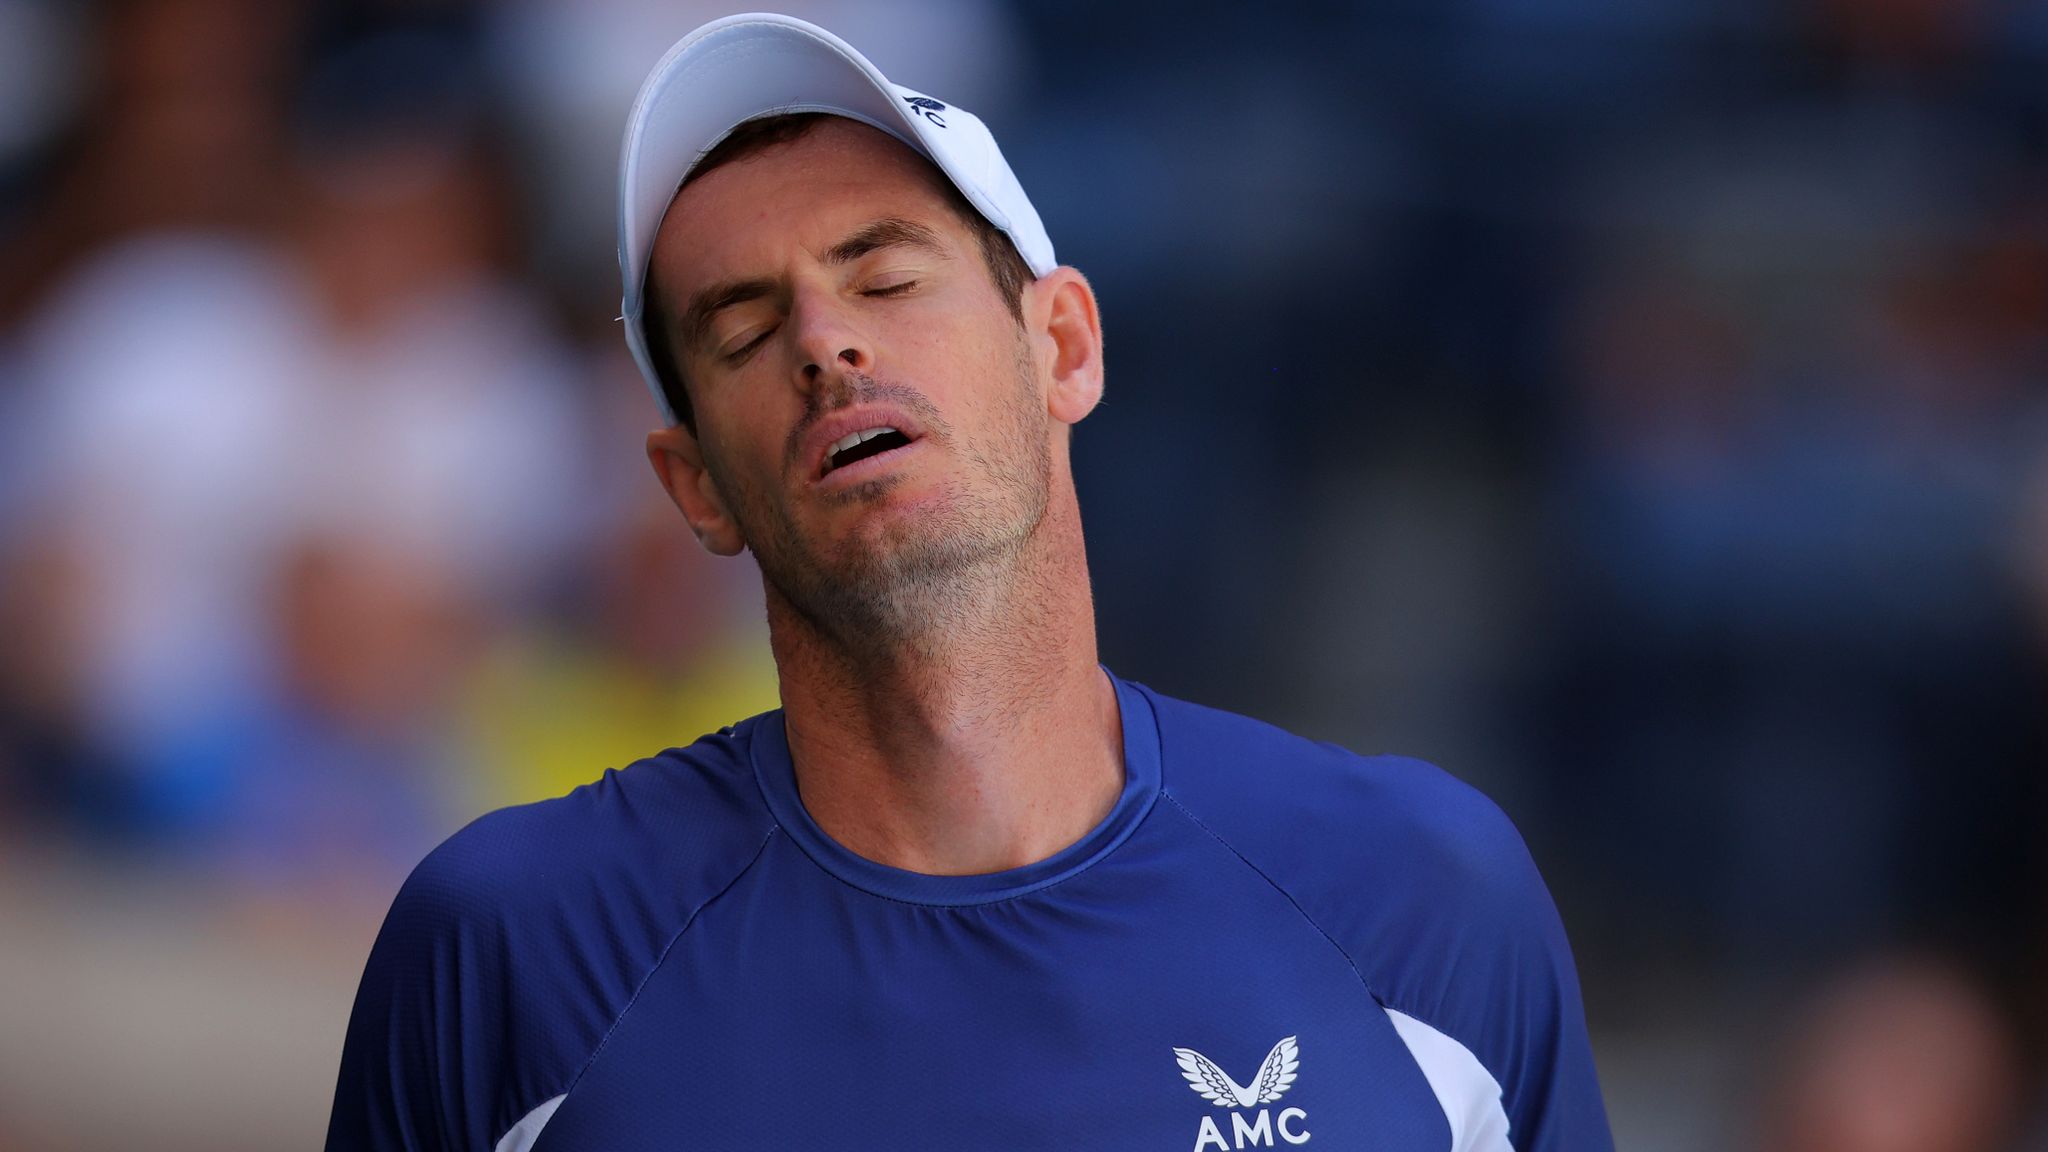 US Open Andy Murray goes down in four sets to Matteo Berrettini at Flushing Meadows in New York Tennis News Sky Sports